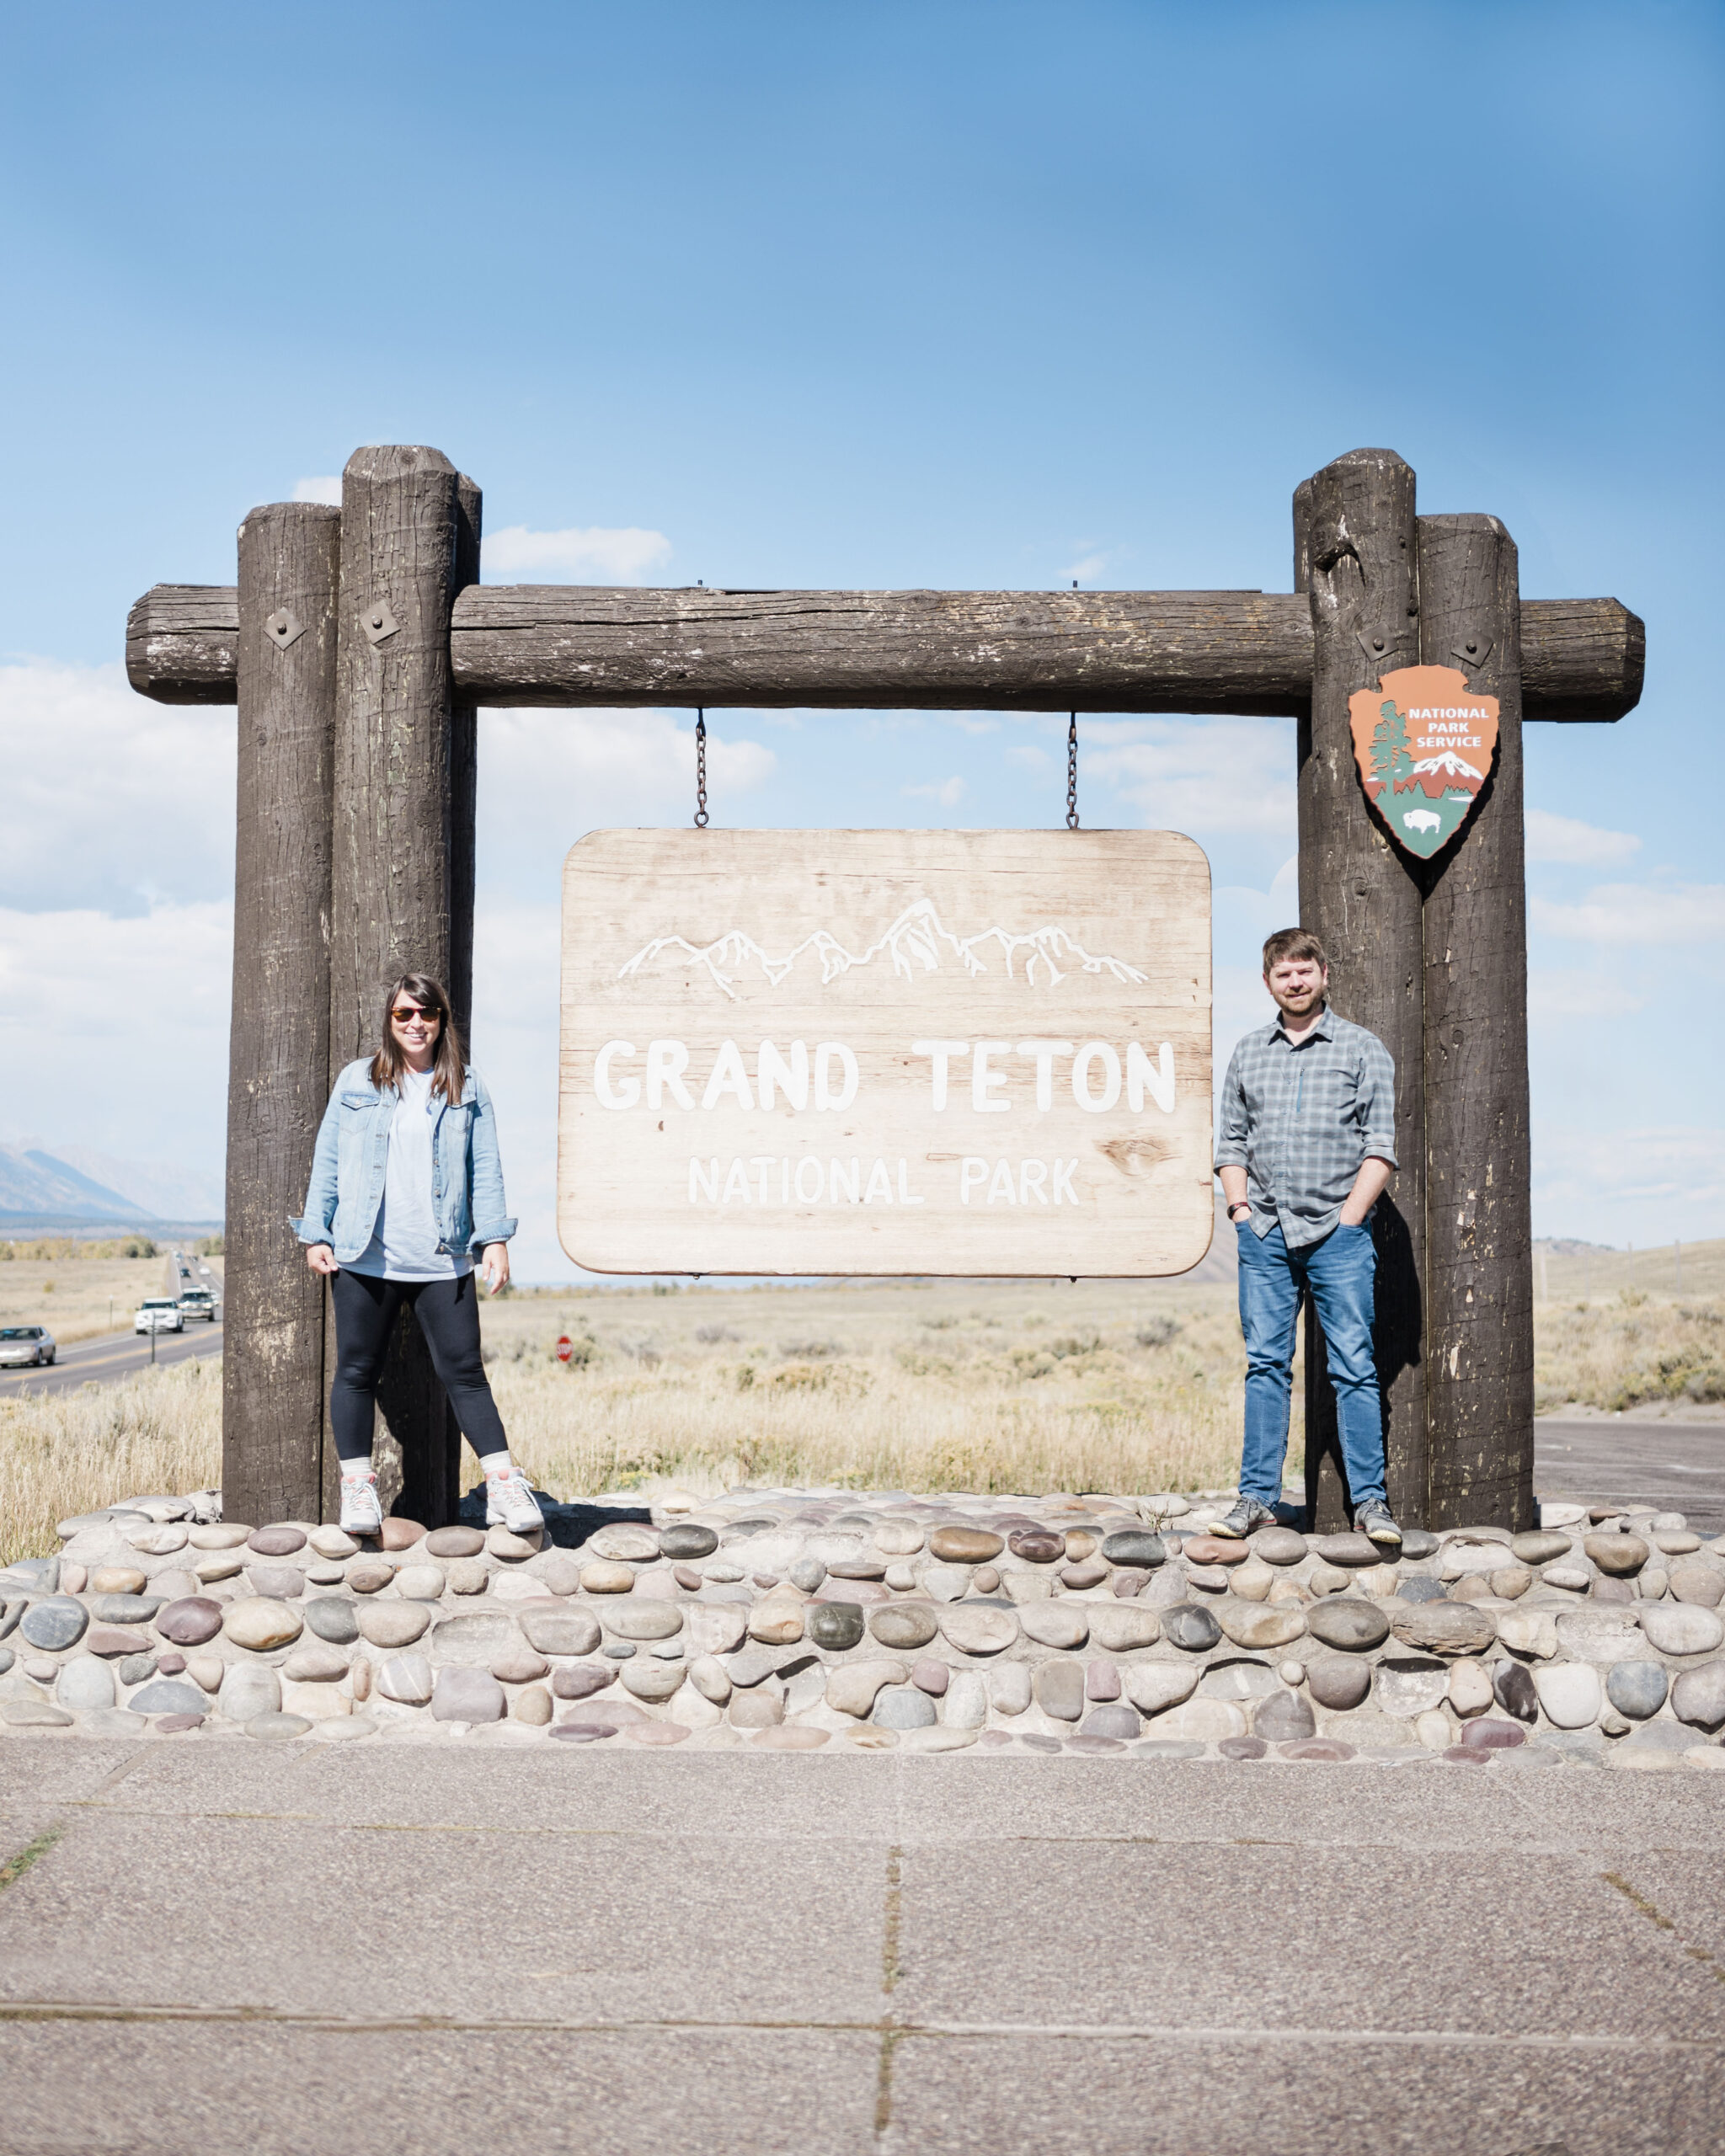 John and Brittney Naylor standing beside the Grand Teton National Park sign in Wyoming